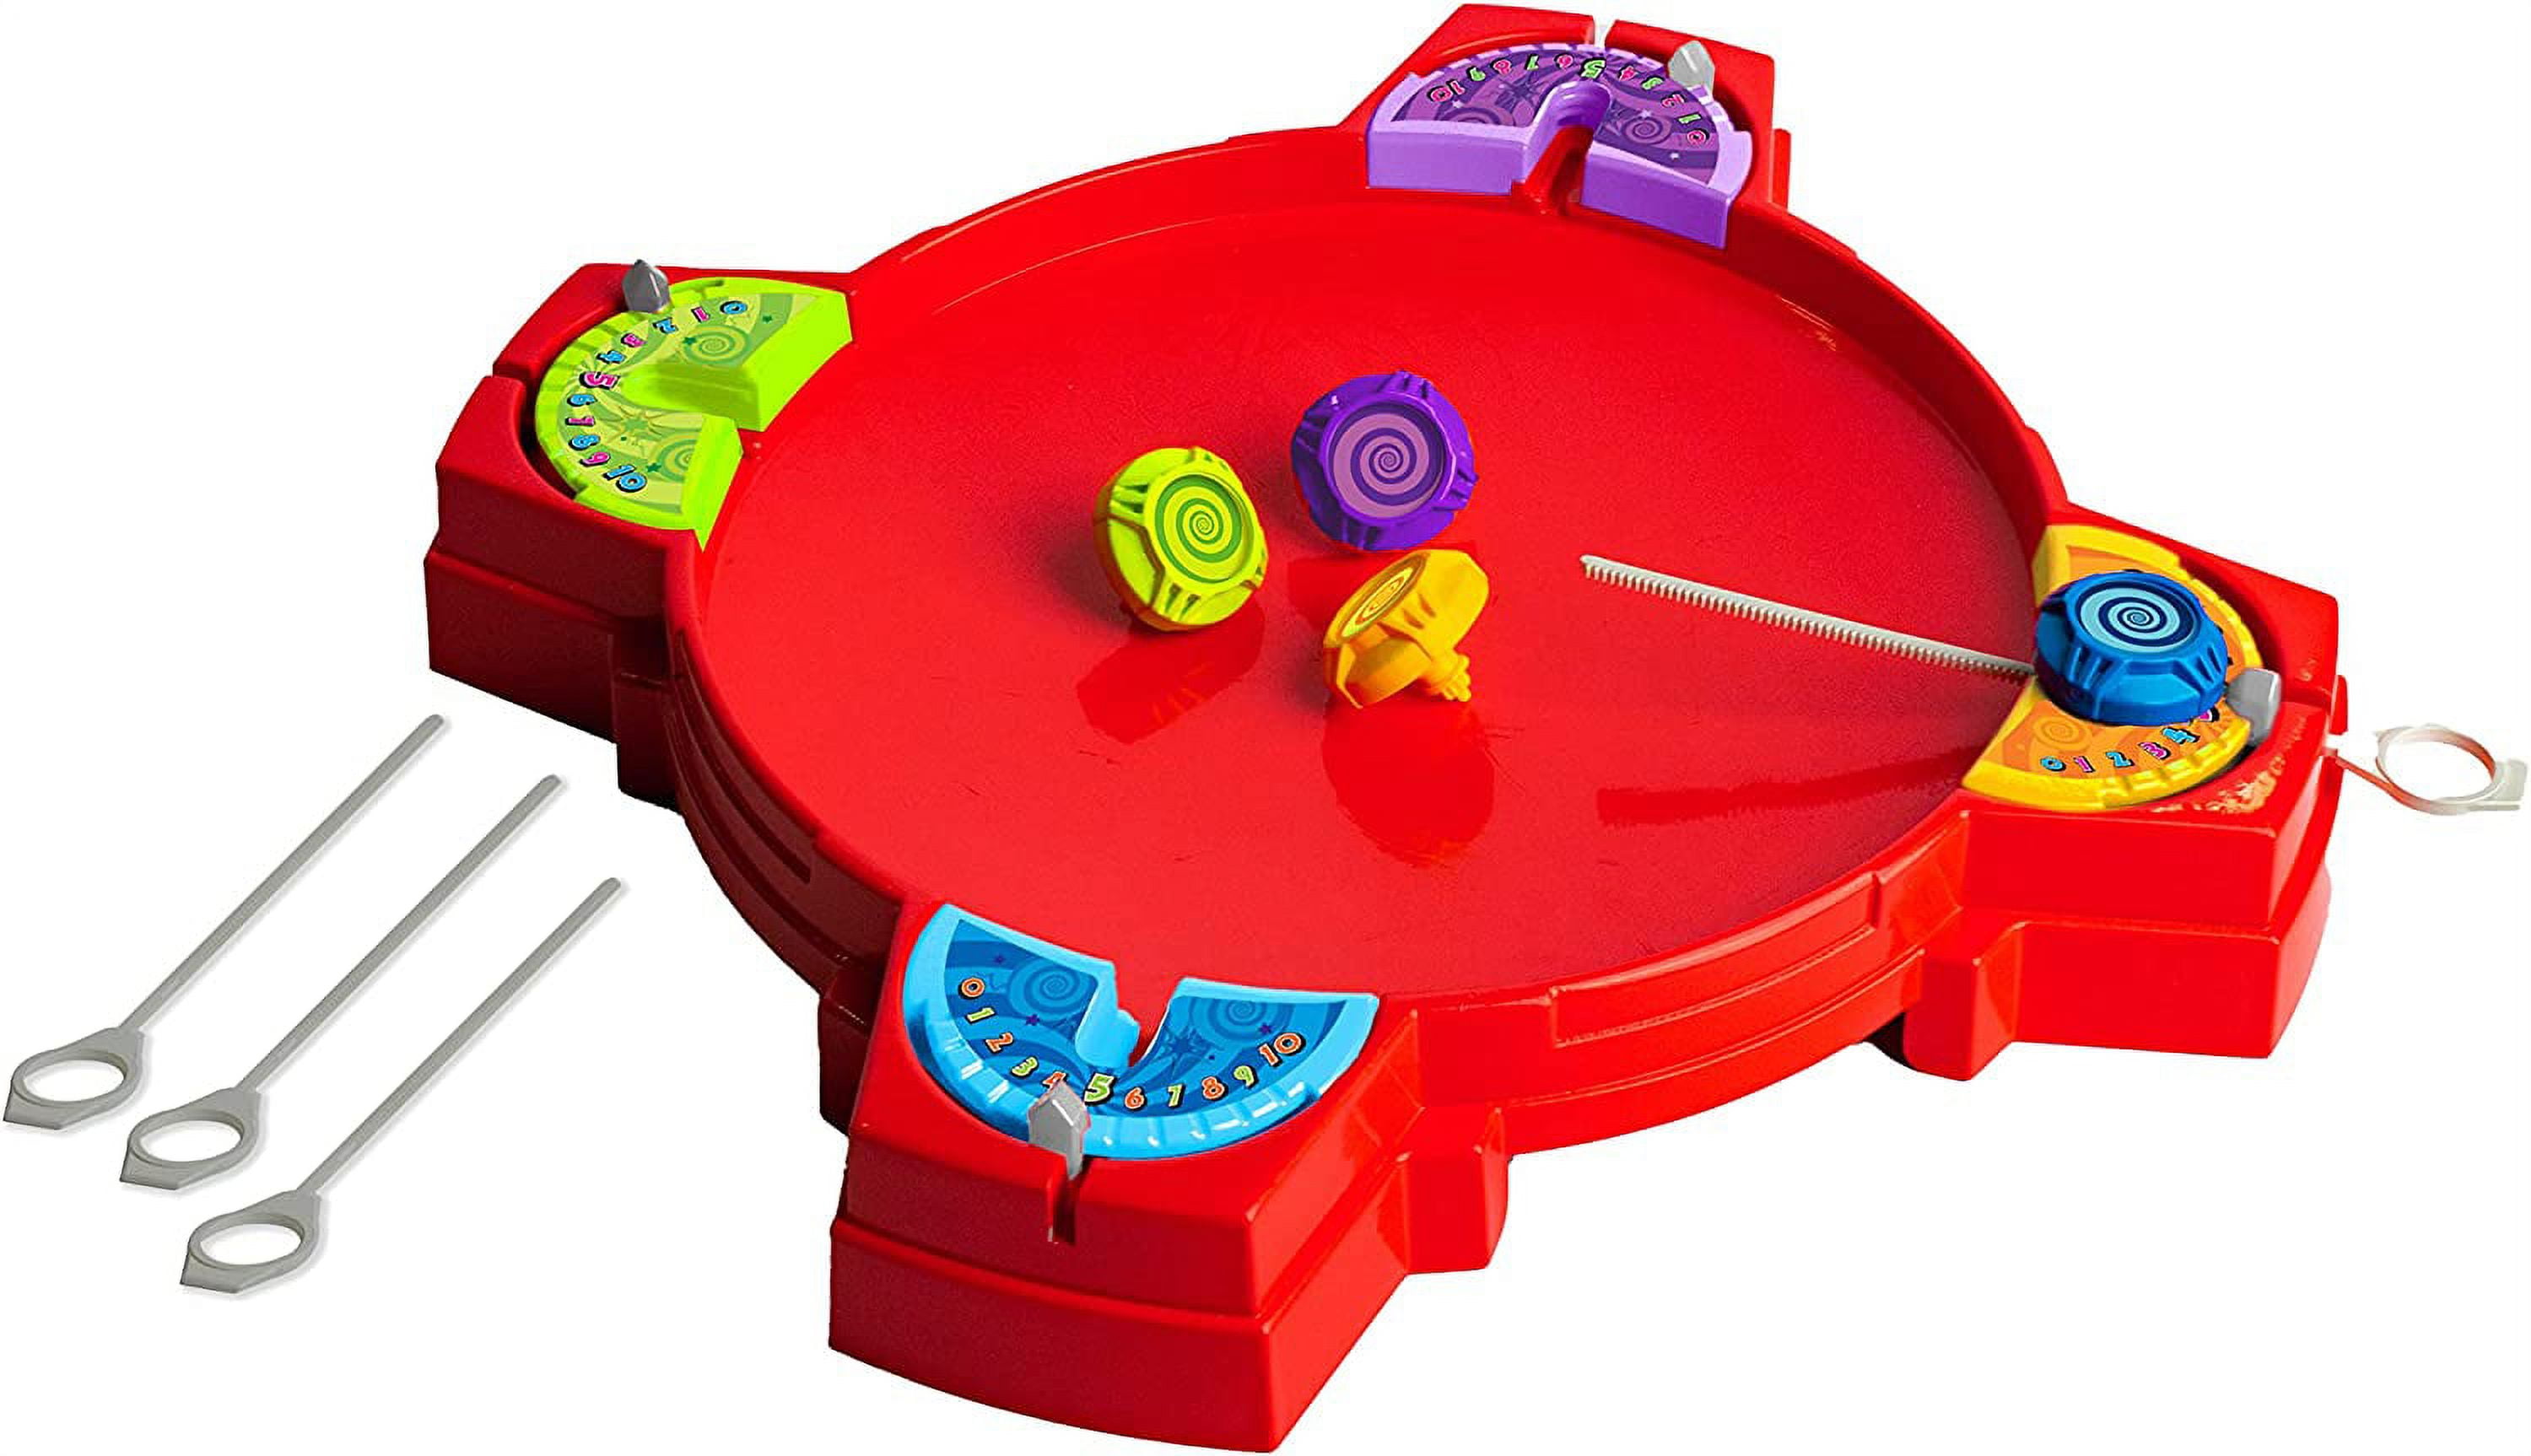 & In Press Tops Pull! - Game Drop with Insert, Tops - Each for Set Kids. 6+ & Battle Gyros Combat Stadium Battling Spinning 2 Girls To 4 Other. Boys The Ages The Classic Original